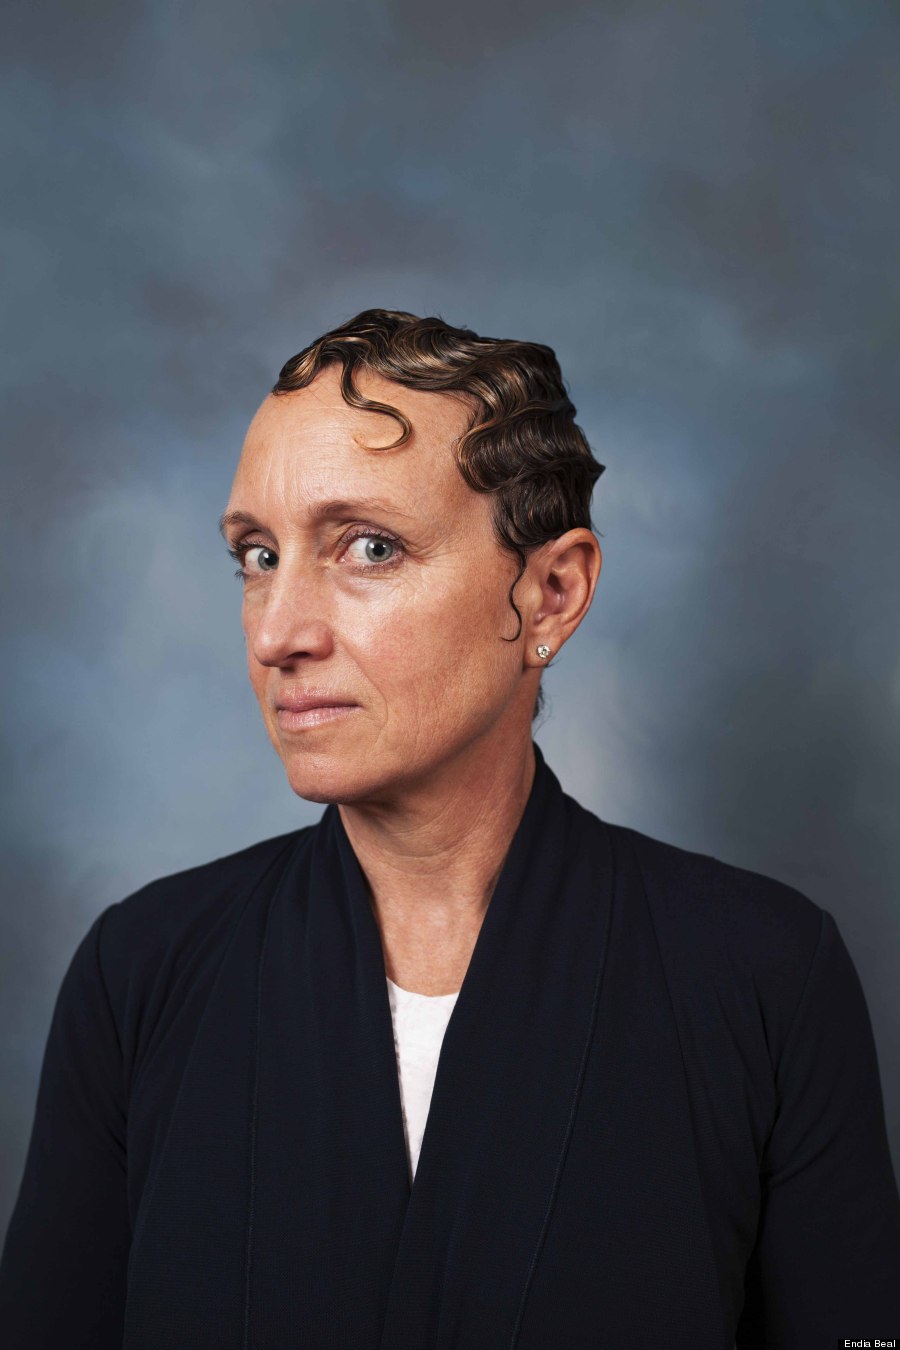 White Women With Black Hairstyles Redefine Corporate